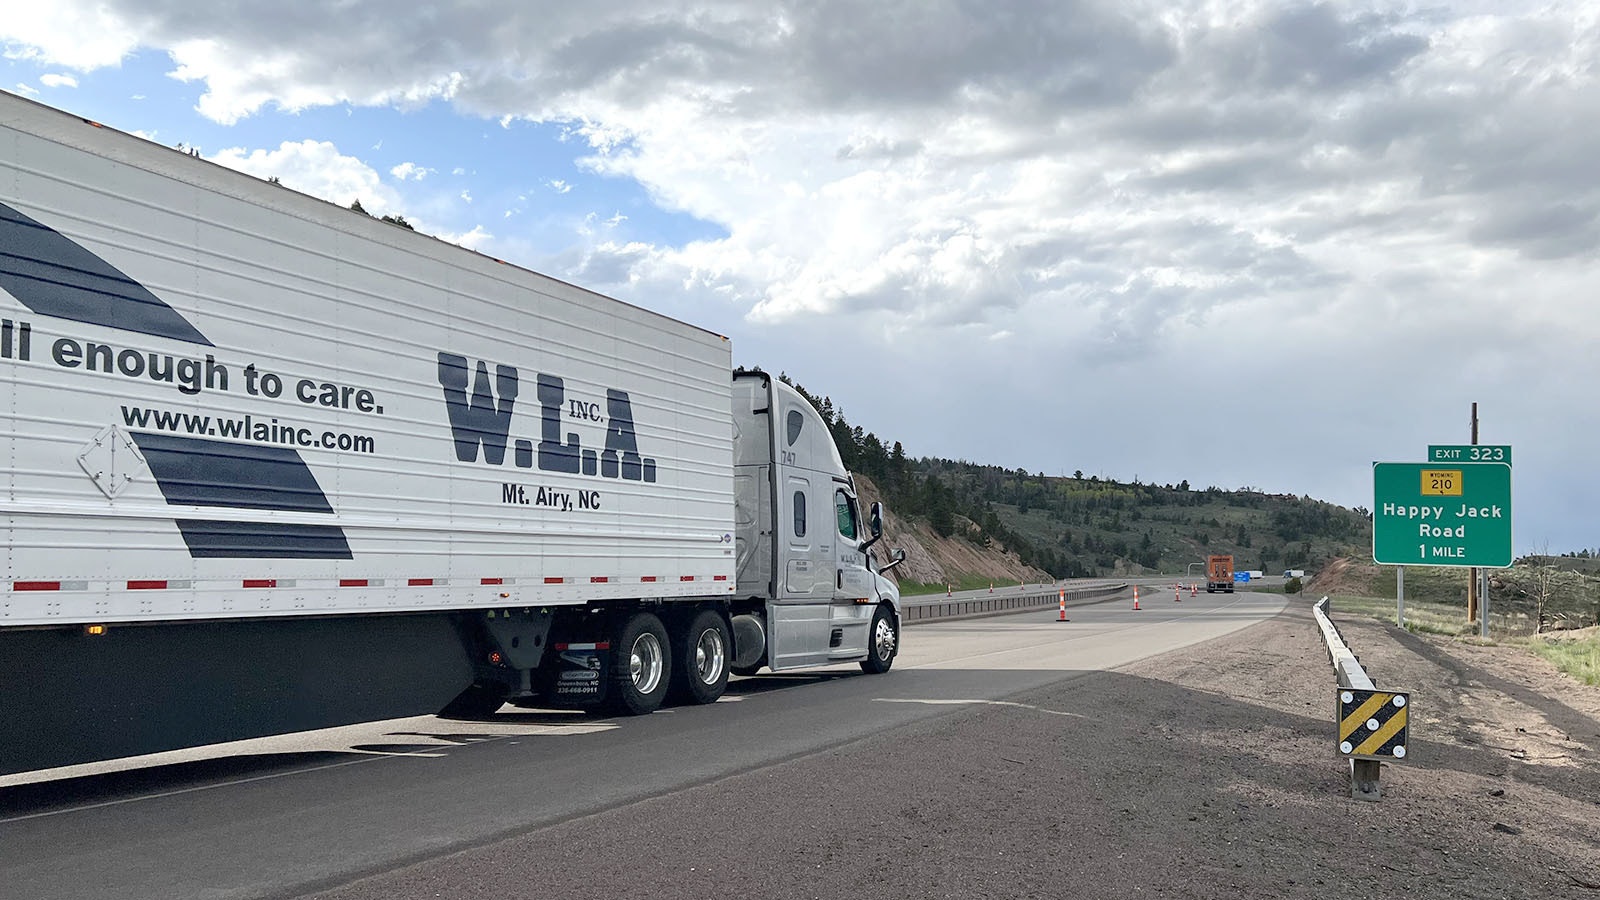 Wyoming truckers say new federal regulations designed to convert their industry to EVs aren't realistic and could hurt smaller companies.